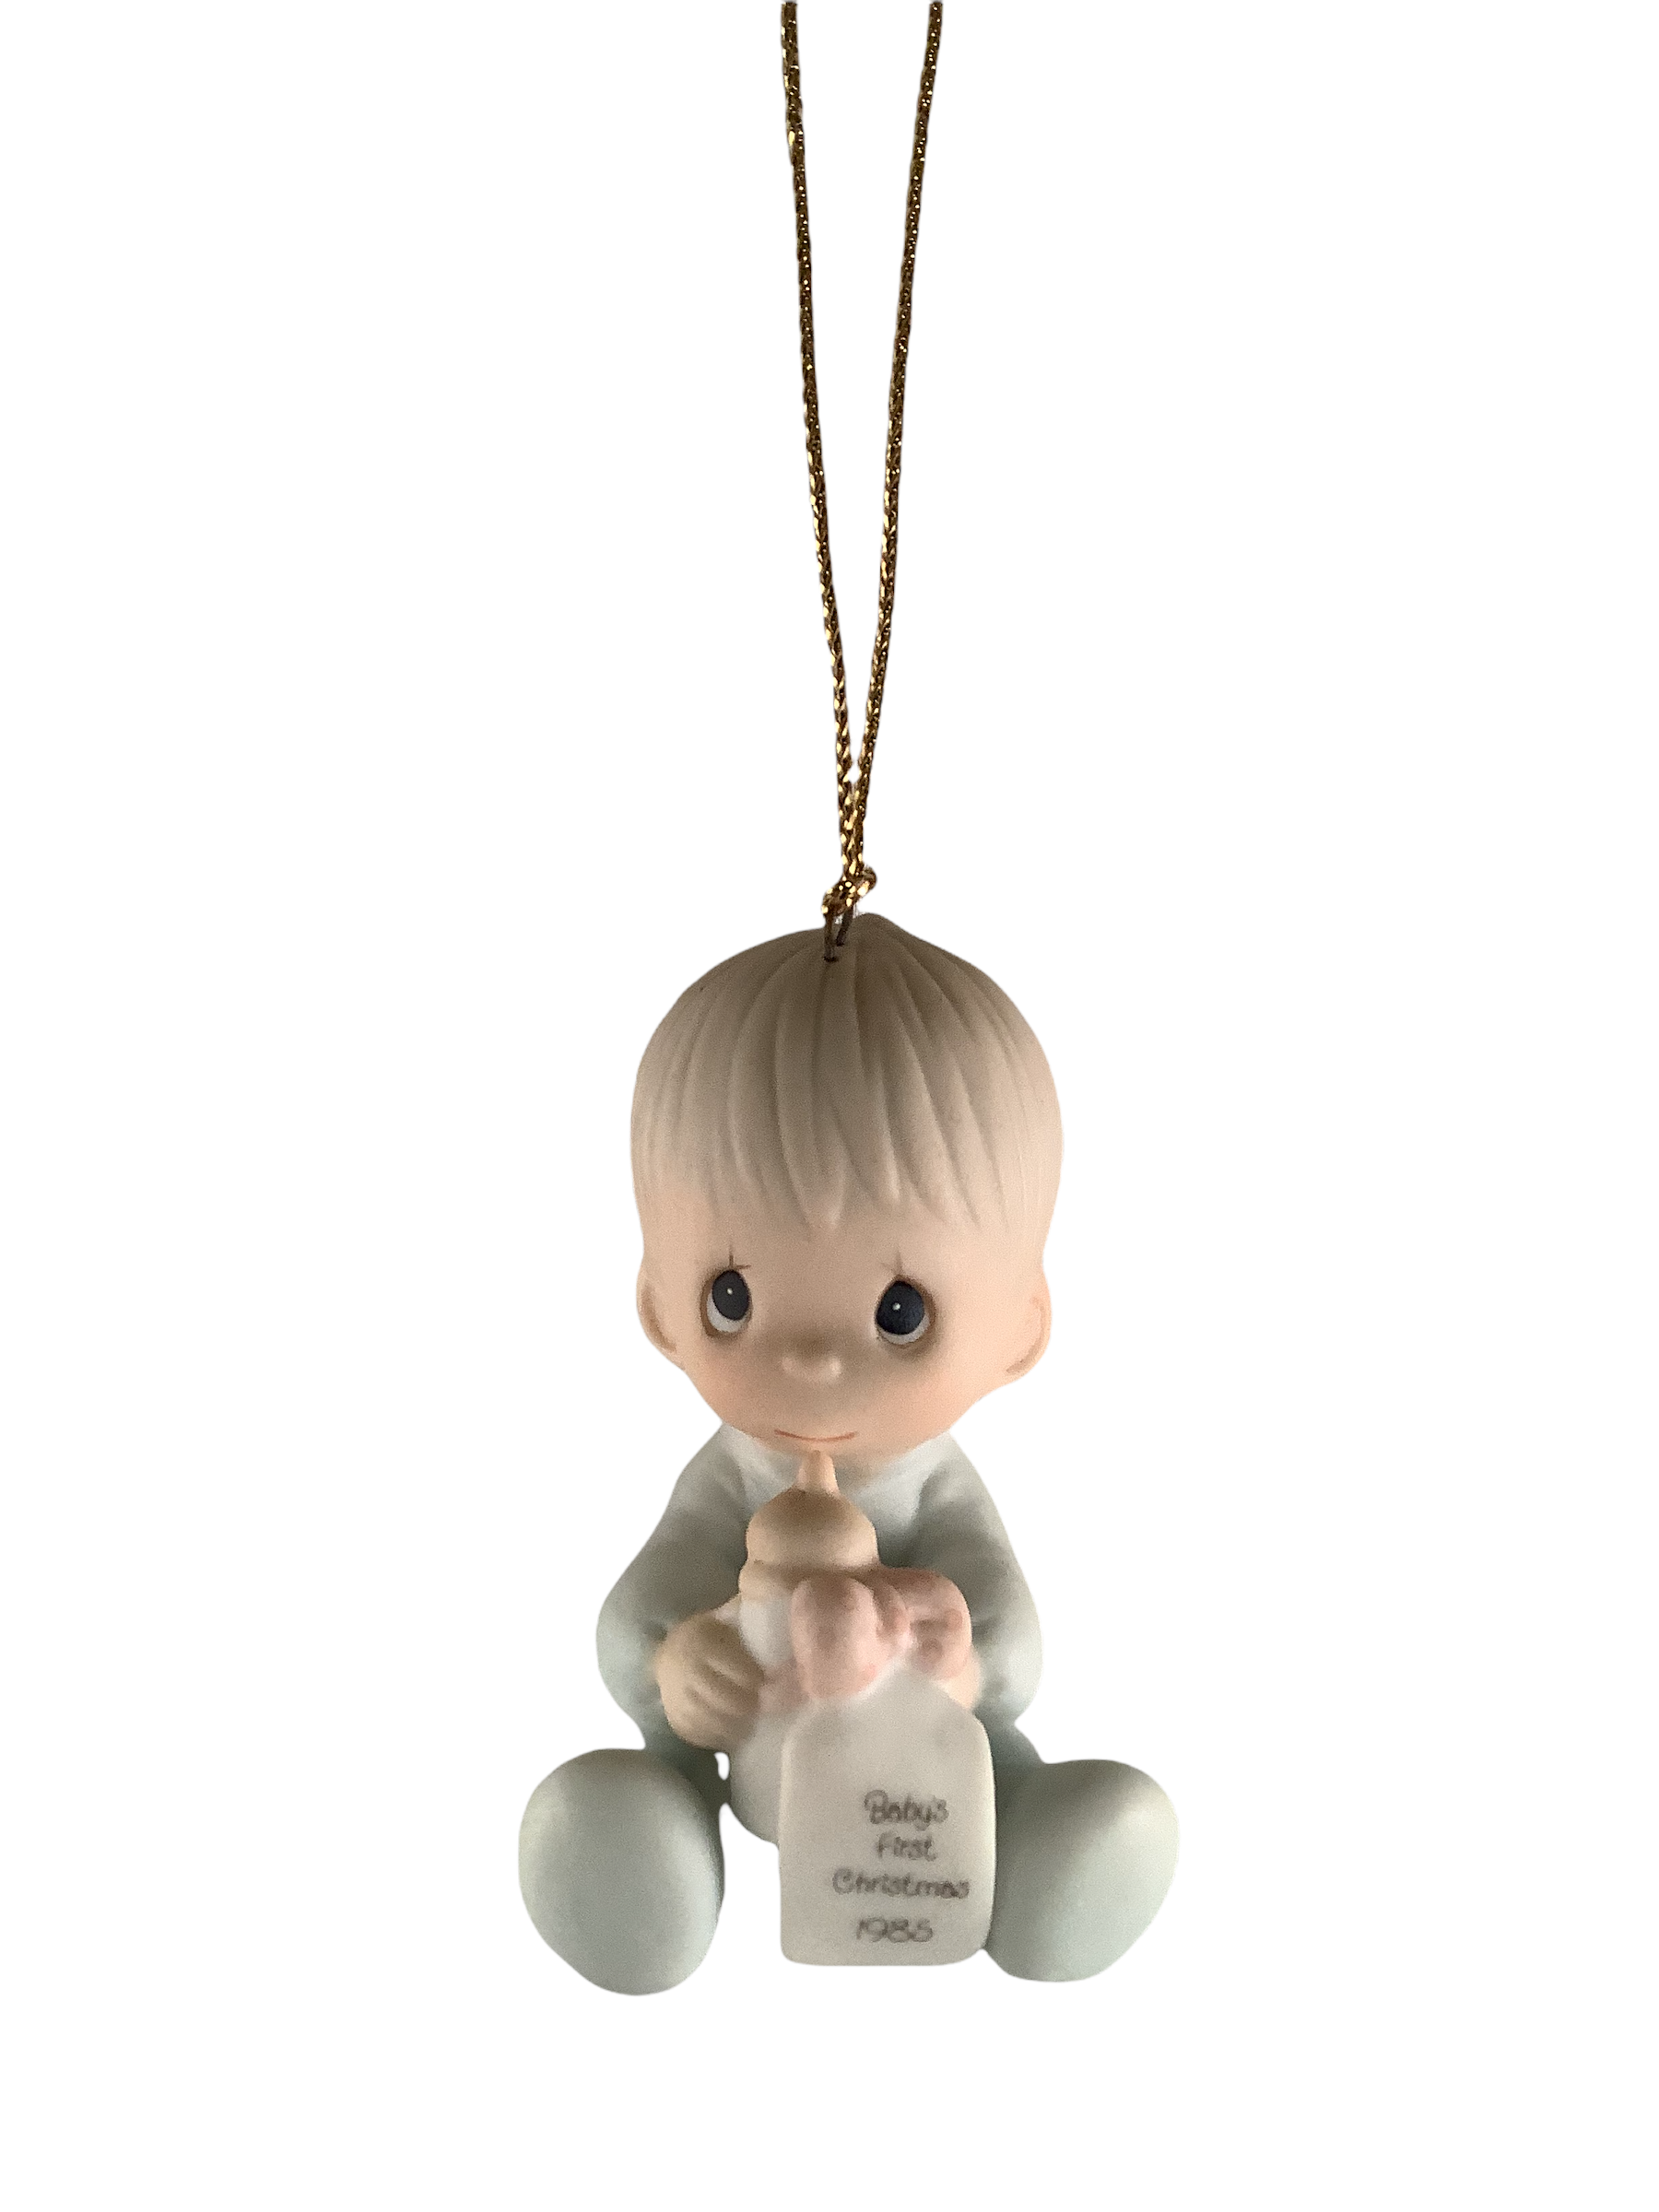 Baby's First Christmas 1985 (Boy) - Precious Moment Ornament